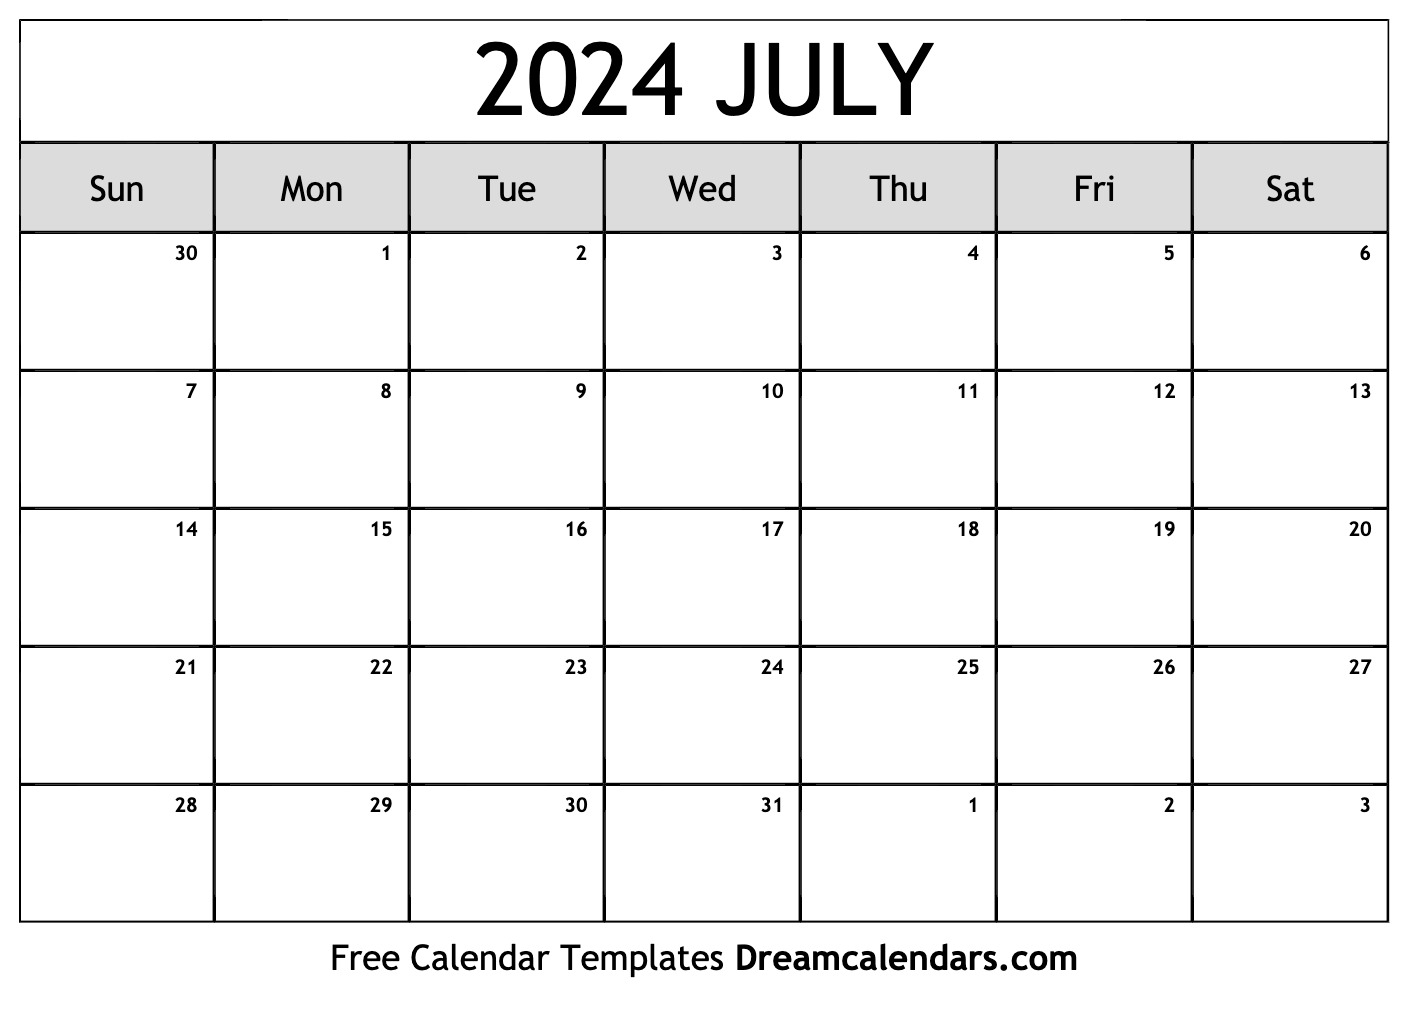 July 2024 Calendar | Free Blank Printable With Holidays for July 2024 Calendar Printable Free